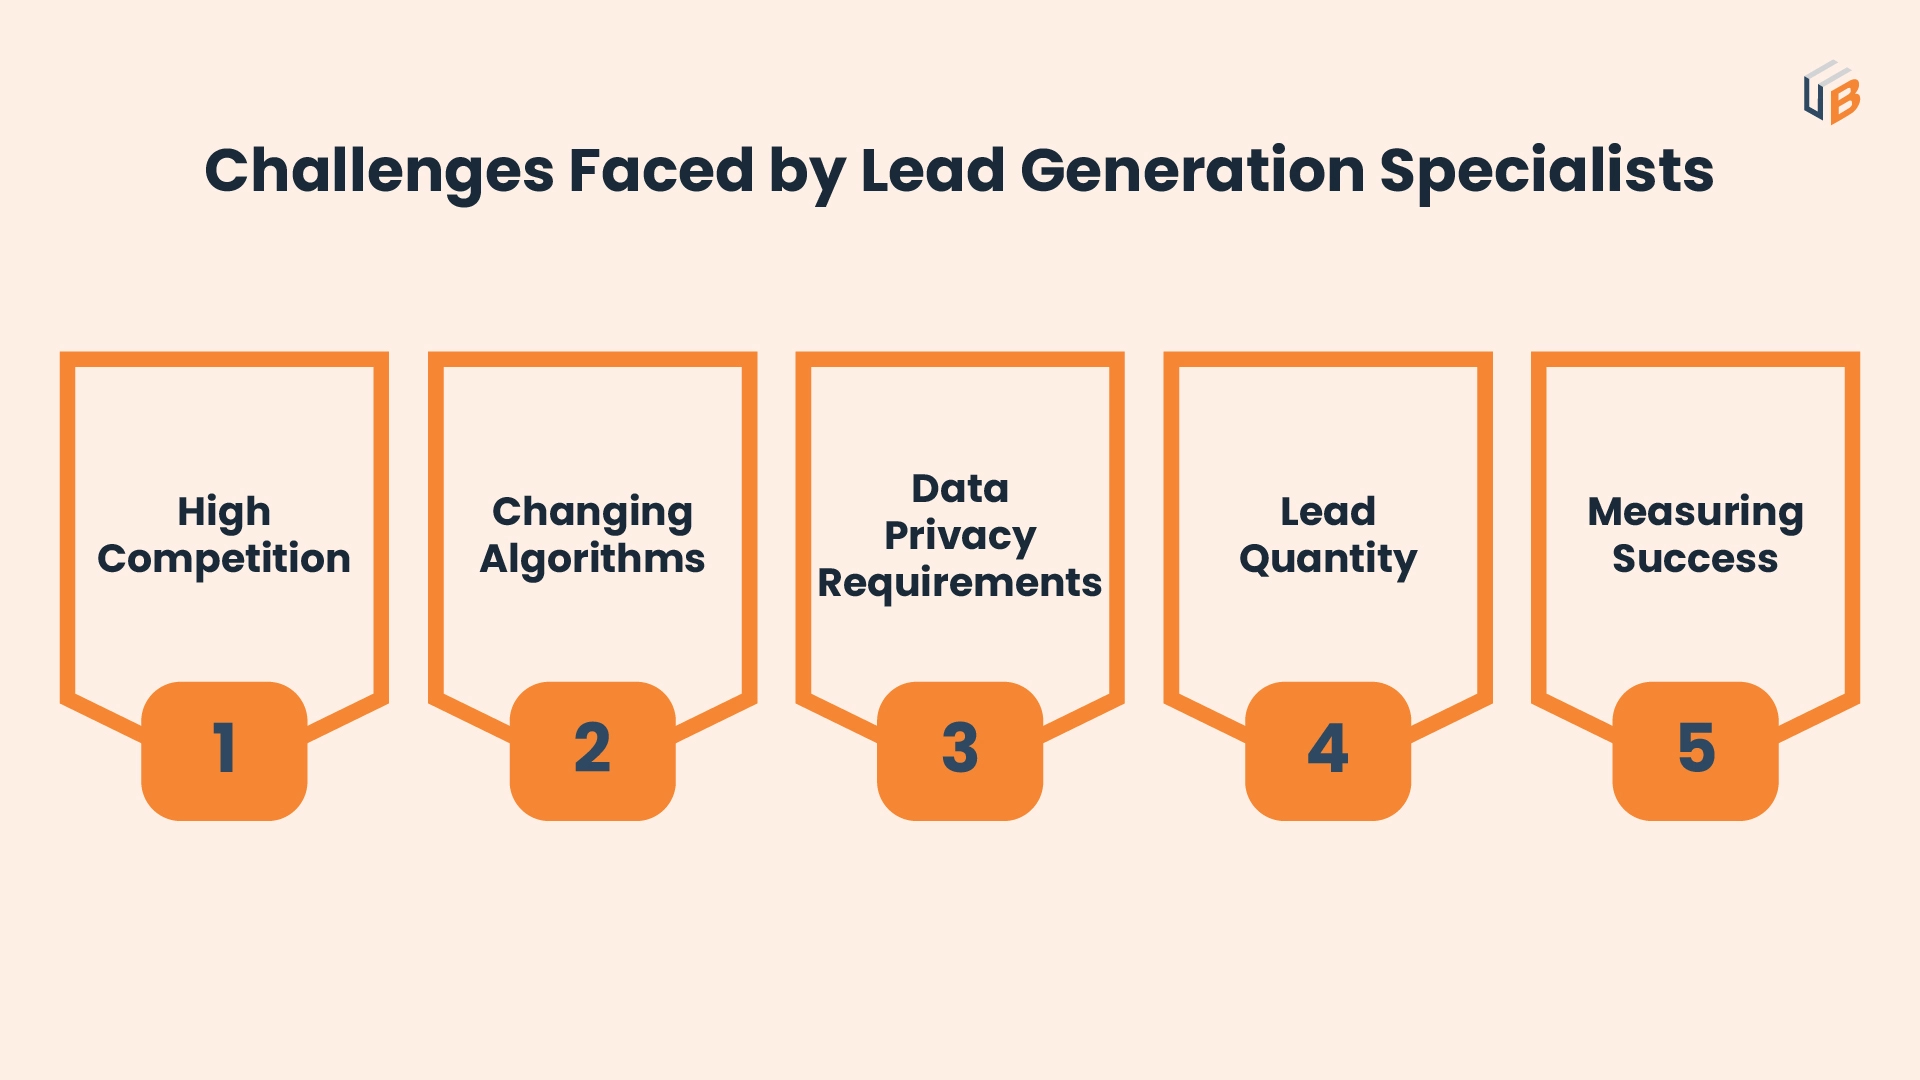 Challenges faced by lead generation specialists